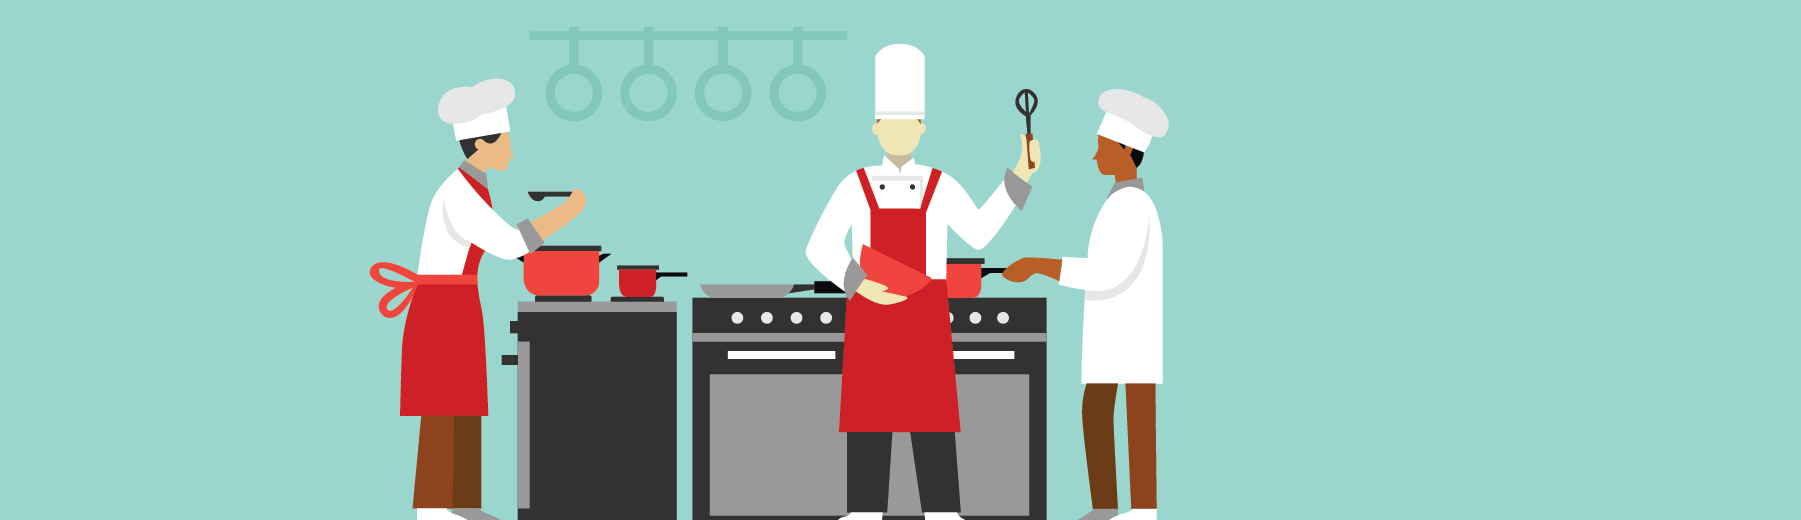 B2B content marketing must account for all the cooks in the kitchen.